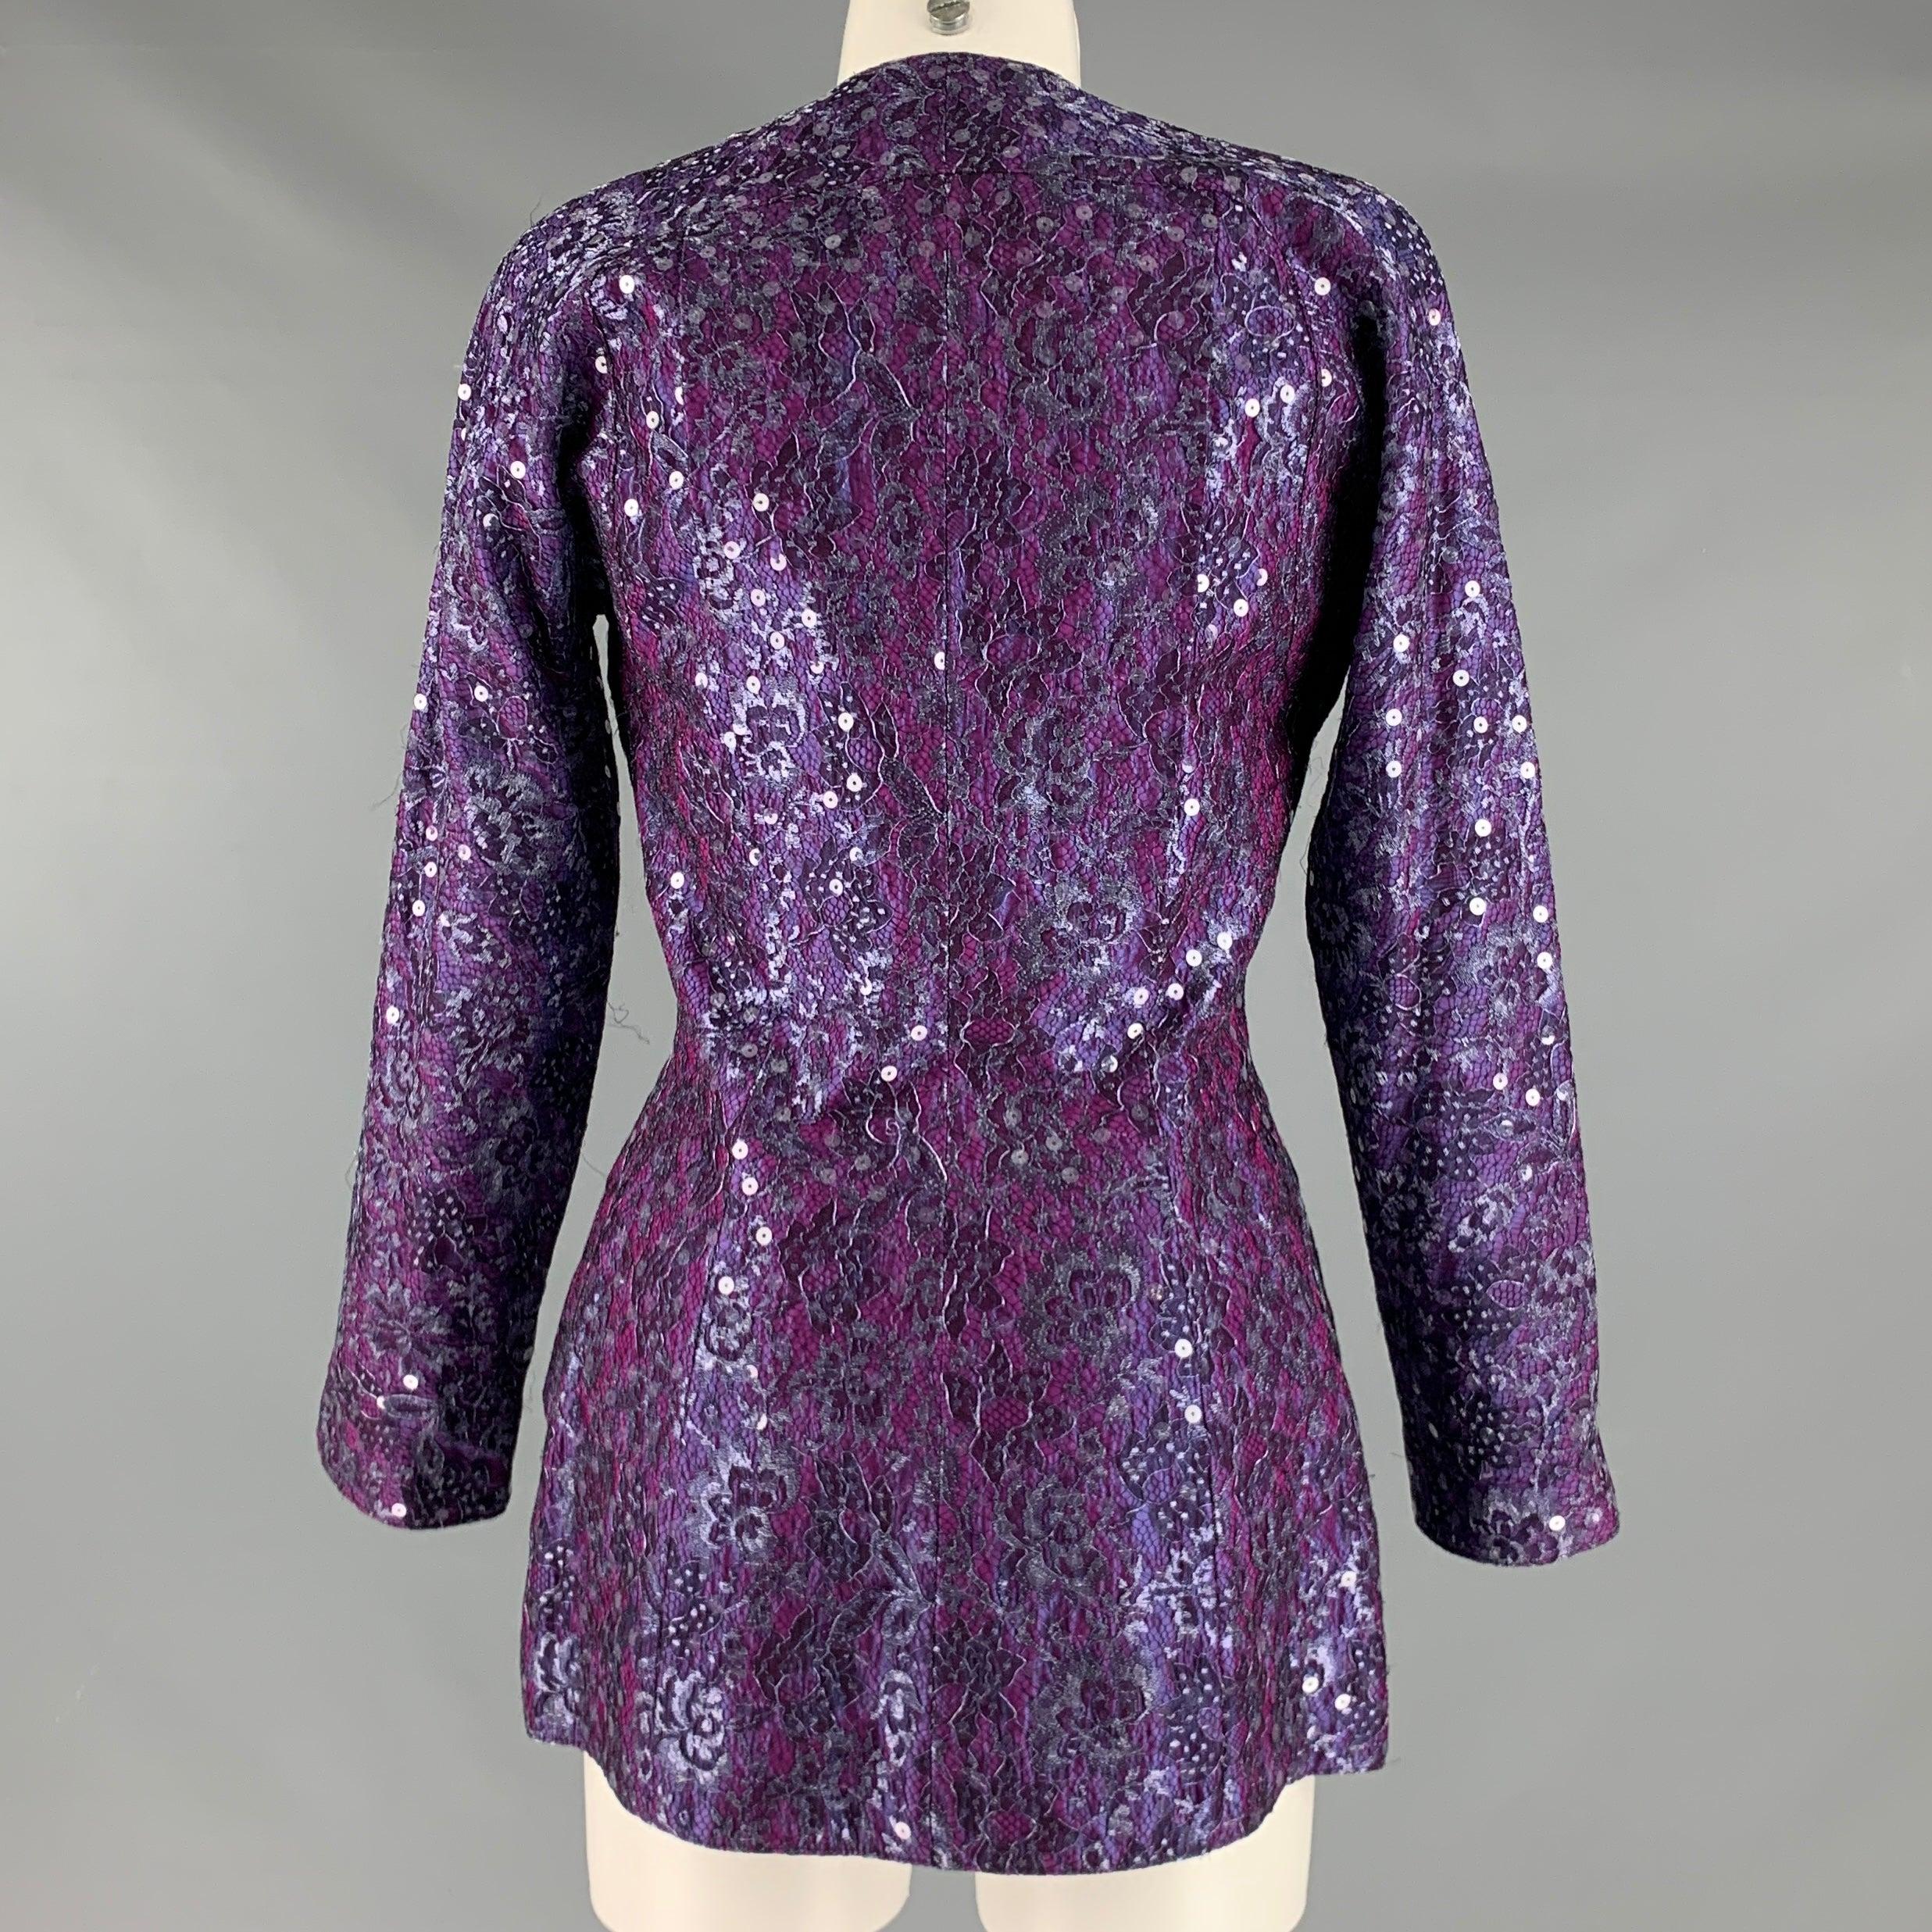 GEOFFREY BEENE Size M Purple Sequined Evening Blazer In Excellent Condition For Sale In San Francisco, CA